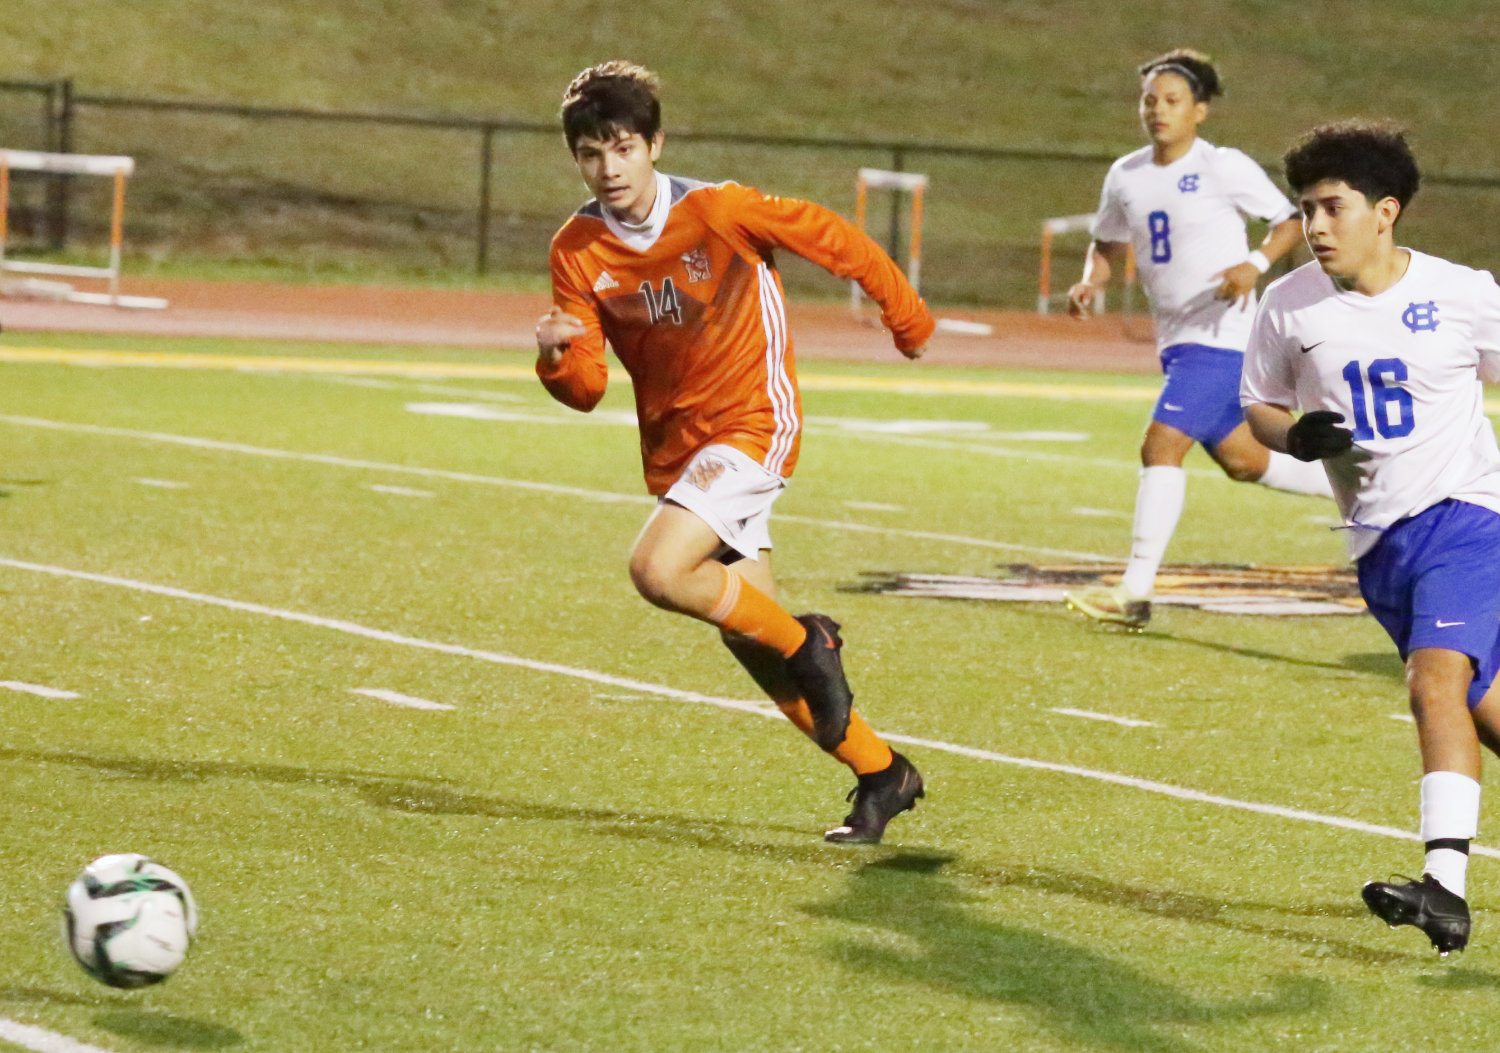 Mineola defender Royer Marquez accelerates to the ball in early action against Chapel Hill.